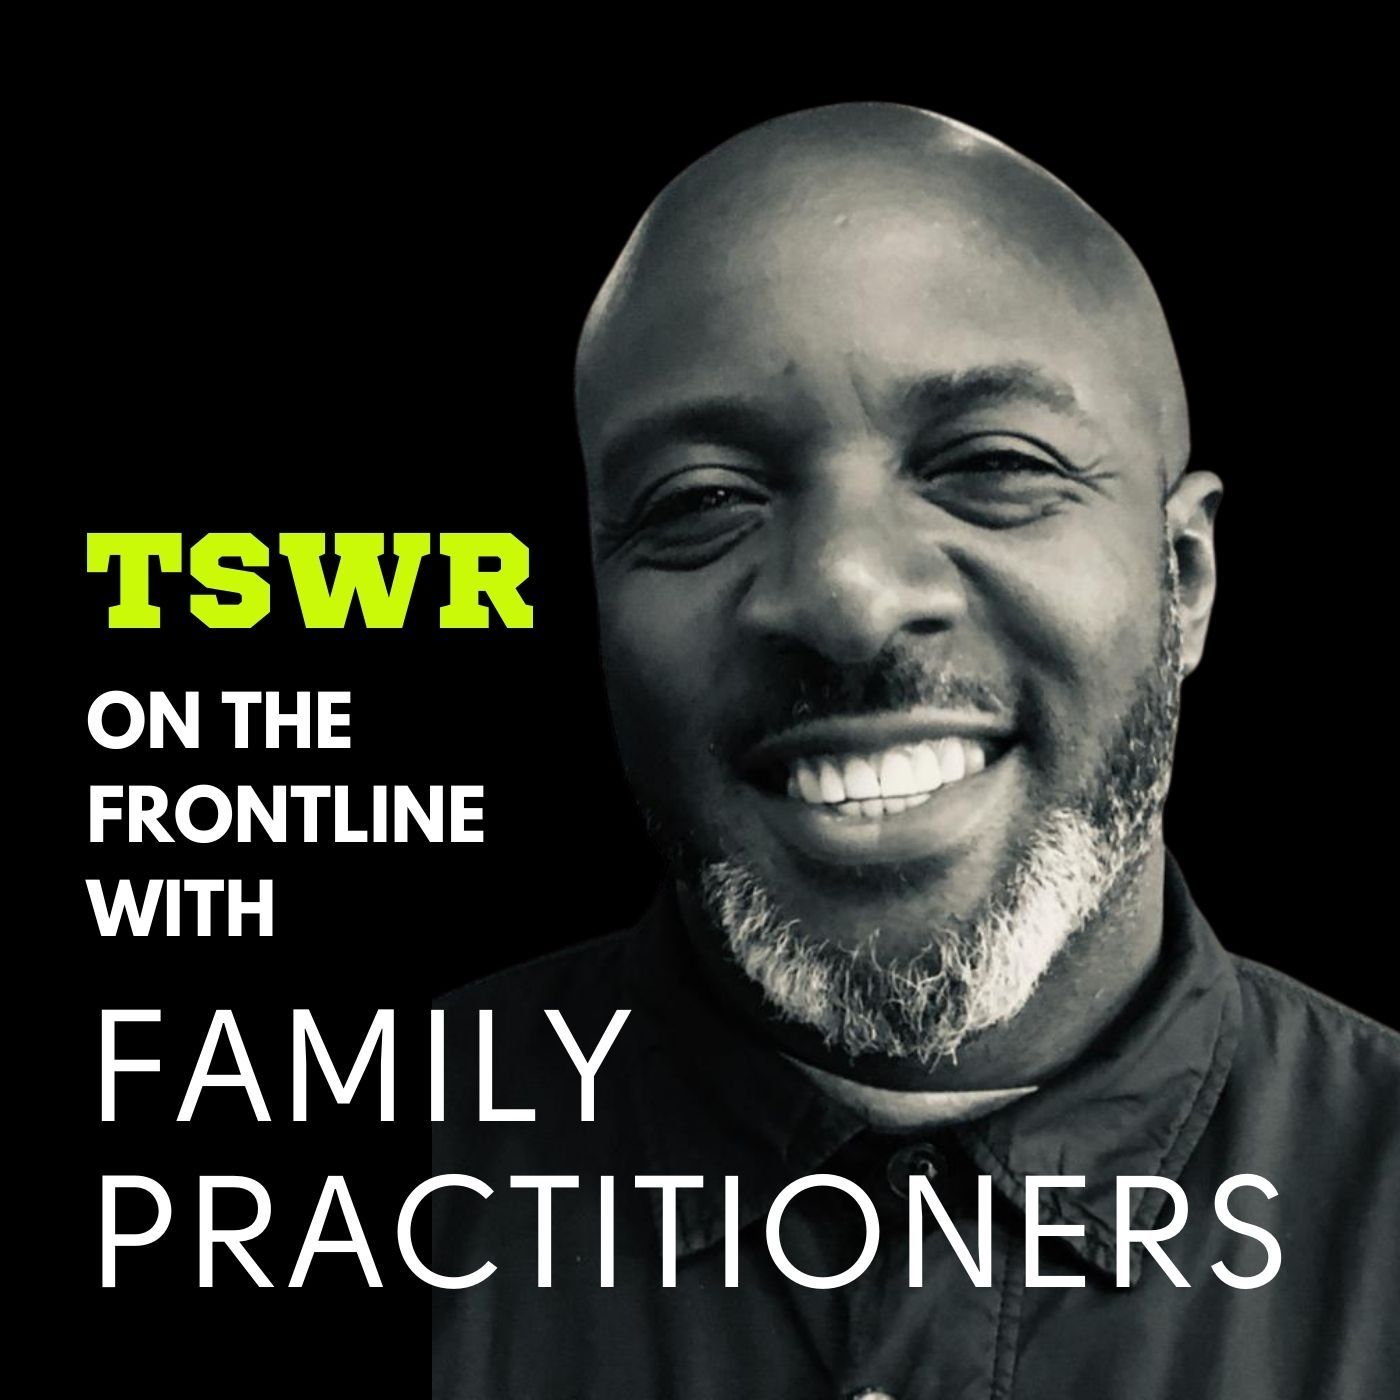 12 Family Practitioners - The Key to Social Challenges.